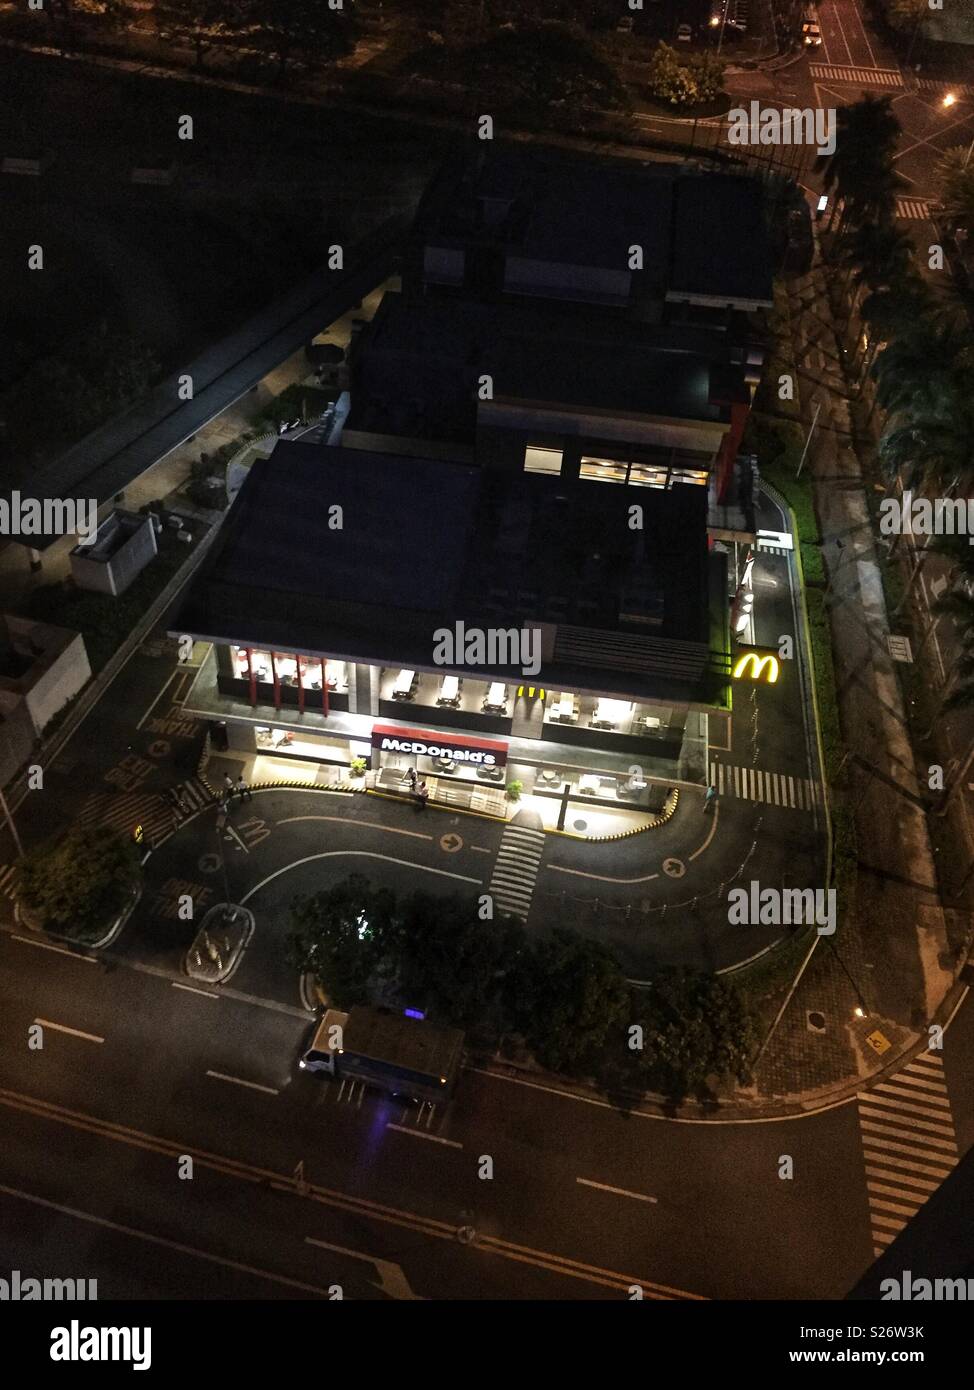 Aerial view of McDonald's restaurant Filinvest City, Alabang Central Business District, Manila, Philippines. Serving the increasingly popular Alabang district, located adjacent to the Acacia Hotel. Stock Photo